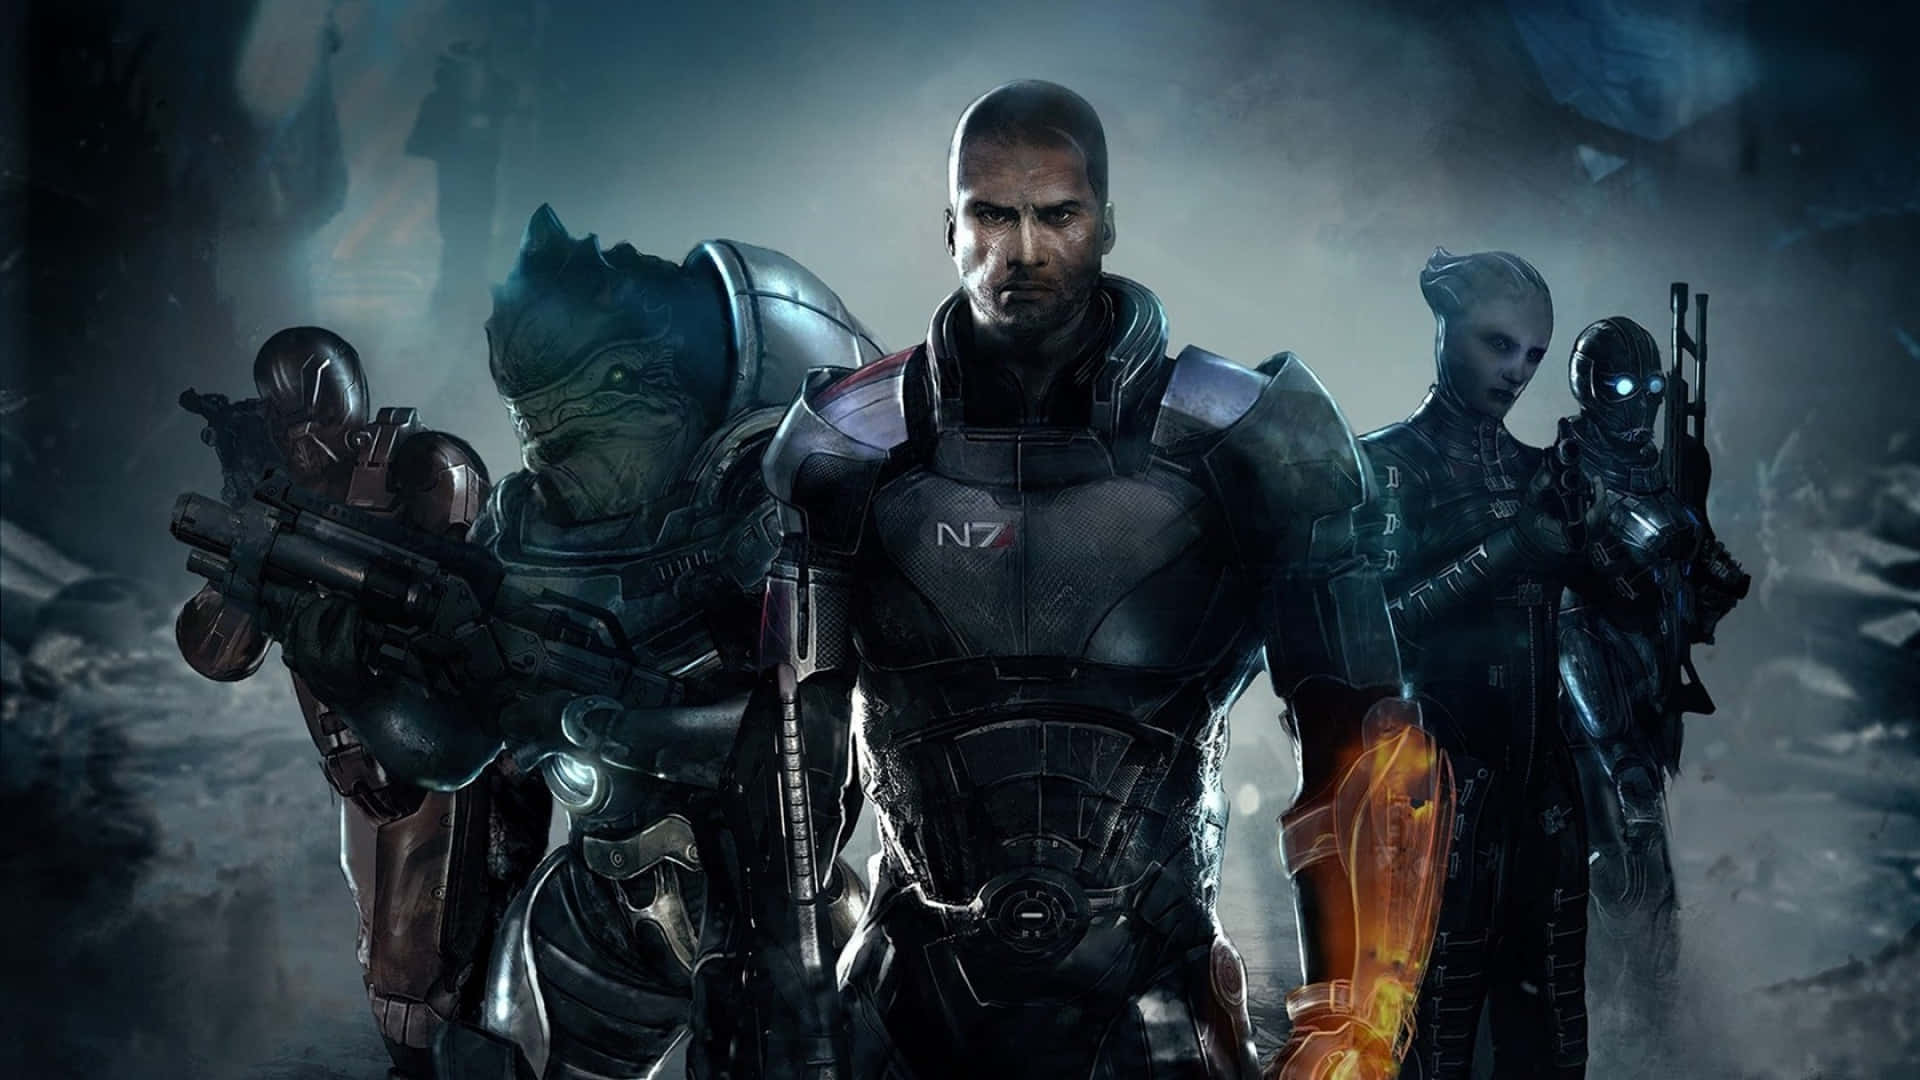 Caption: Mass Effect Characters Gearing Up for Battle Wallpaper